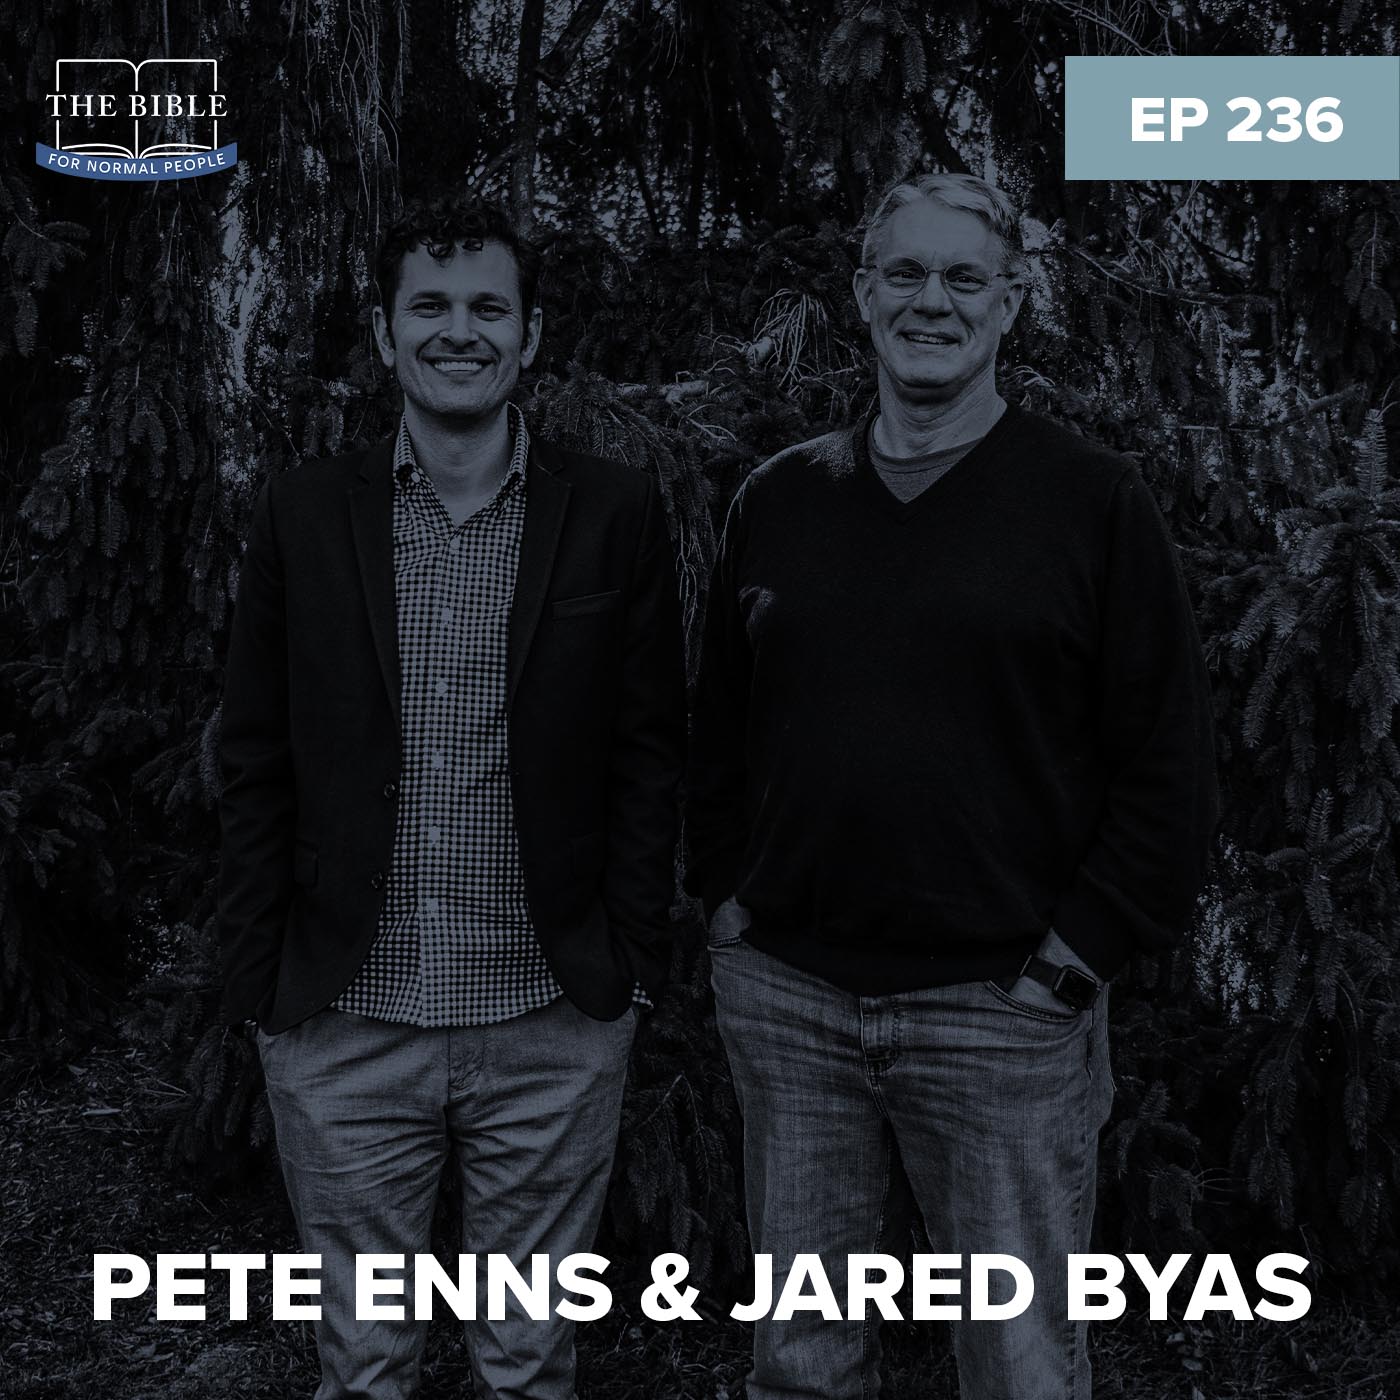 Episode 236: Pete Enns & Jared Byas – Should the Bible Be Read Like Any Other Book?